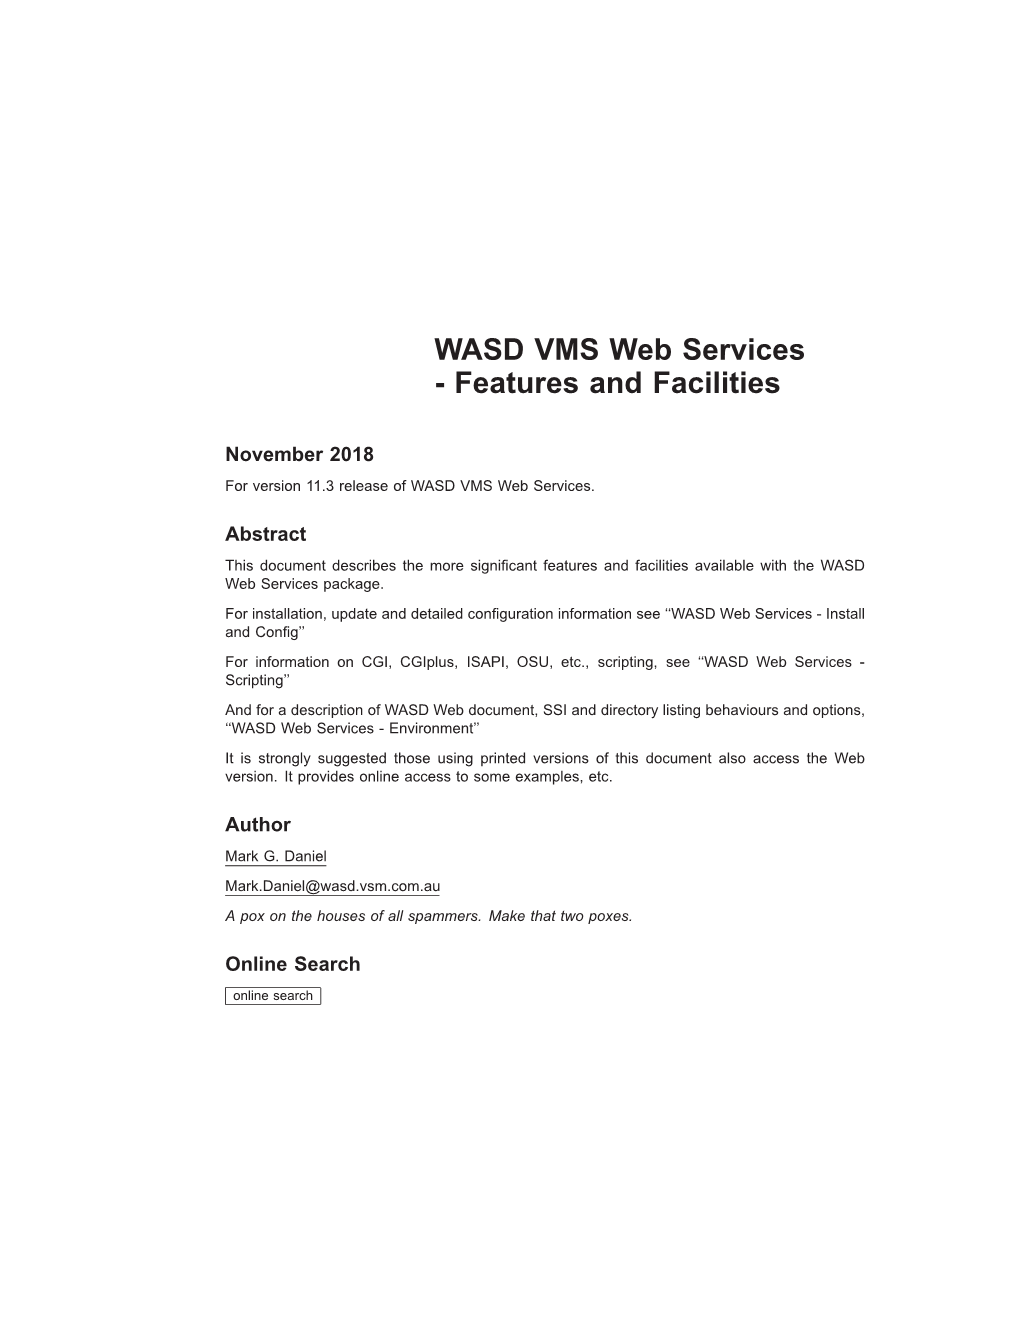 WASD VMS Web Services - Features and Facilities